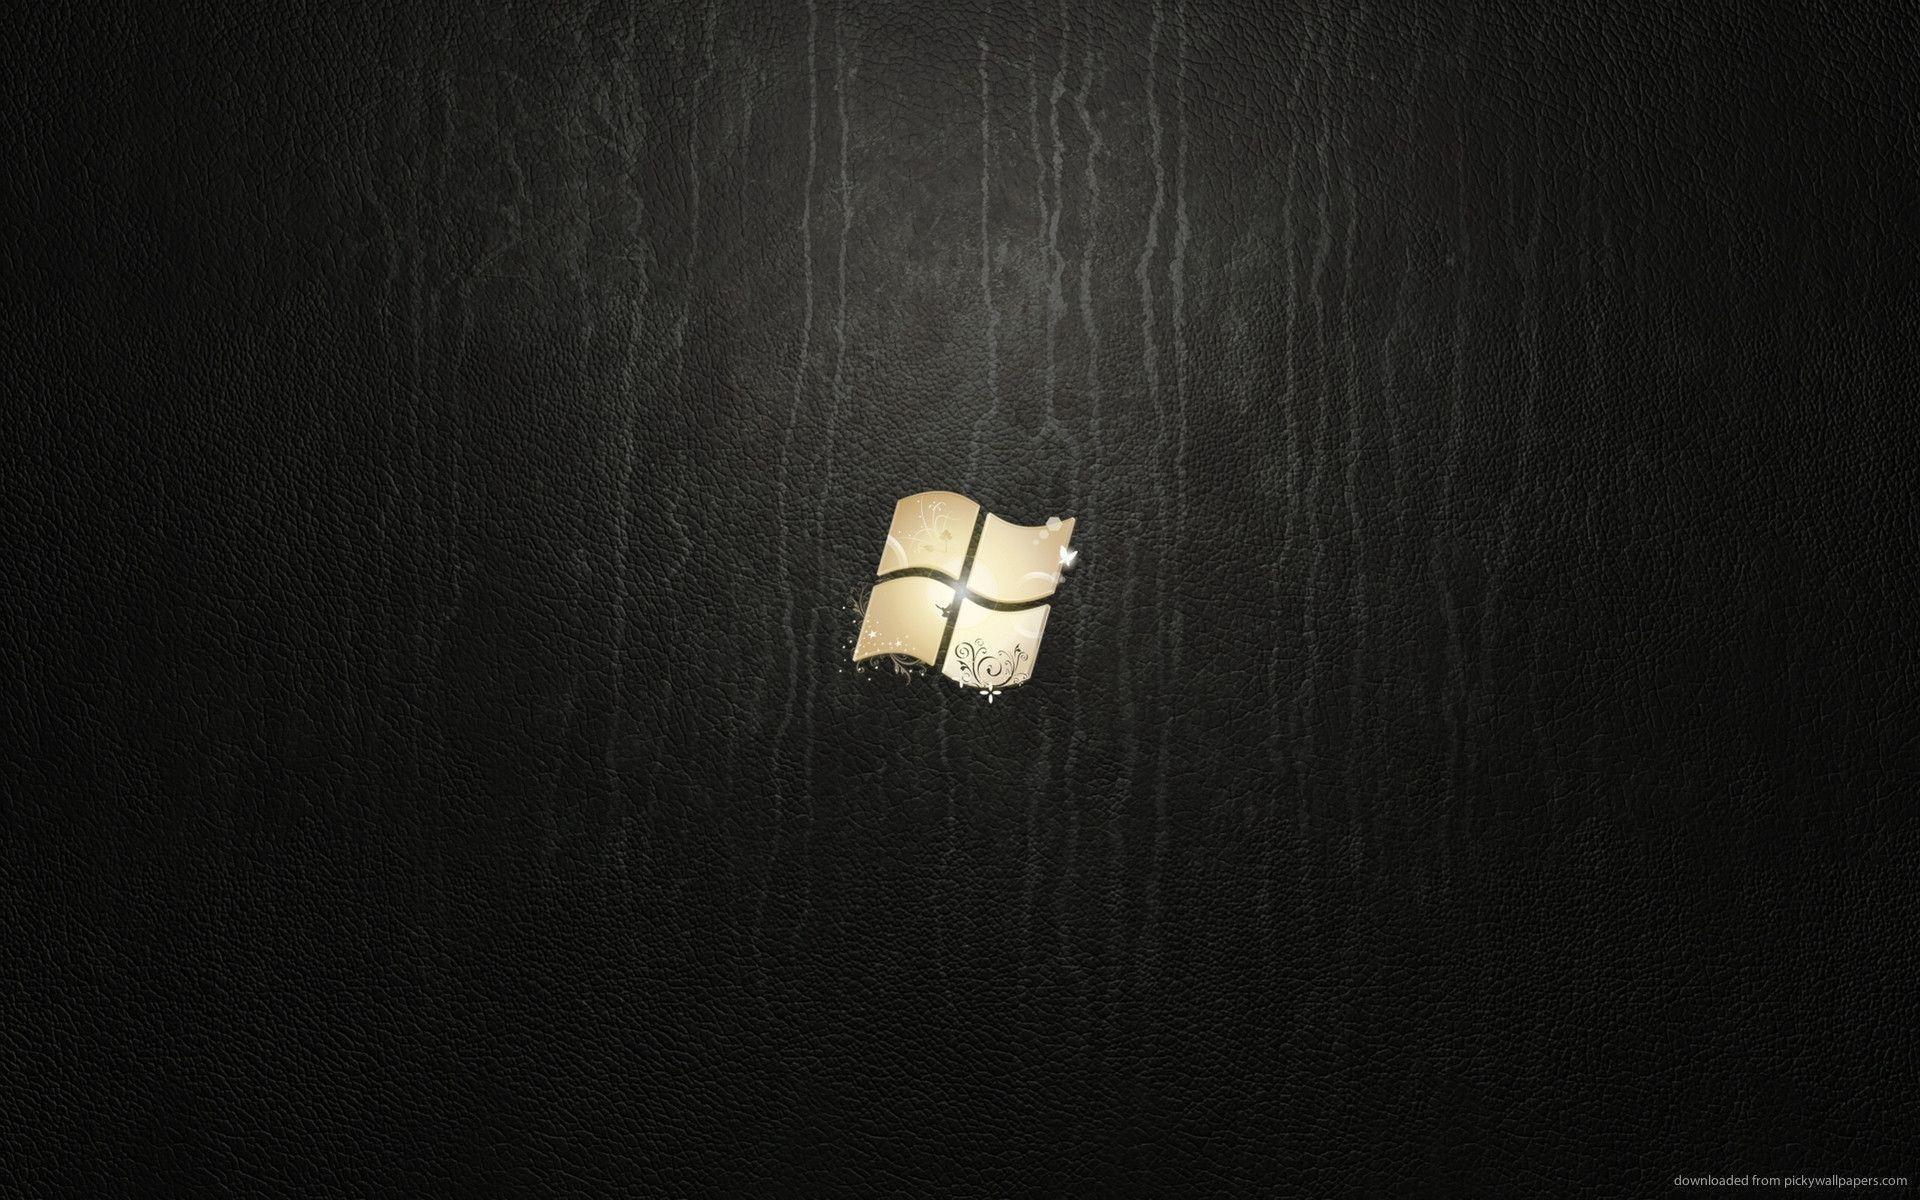 Download 1920x1200 Windows 7 Ultimate Leather Wallpaper